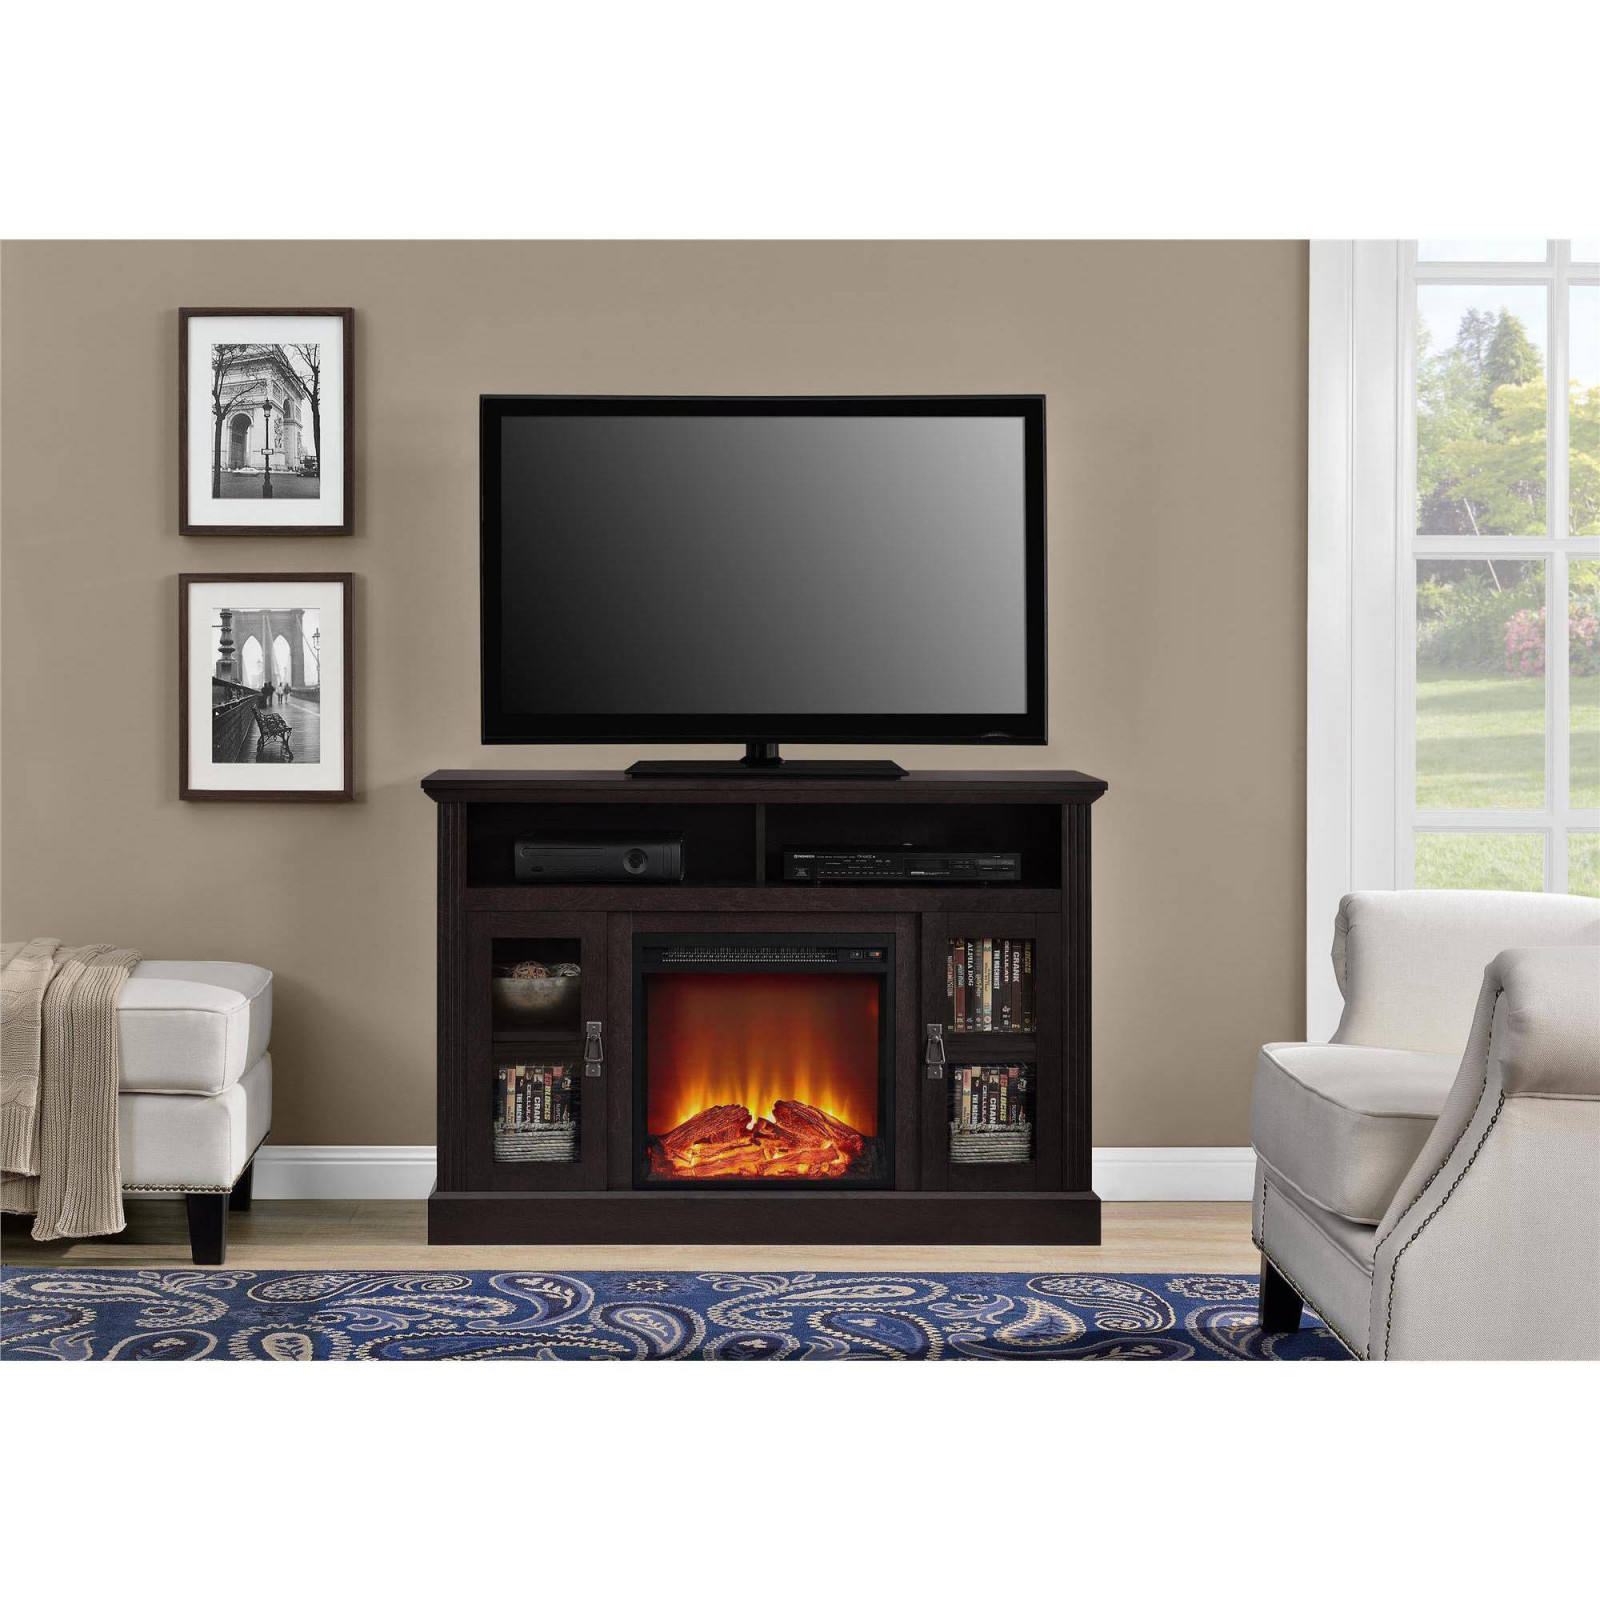 Stone Fireplace Tv Stand New 35 Minimaliste Electric Fireplace Tv Stand